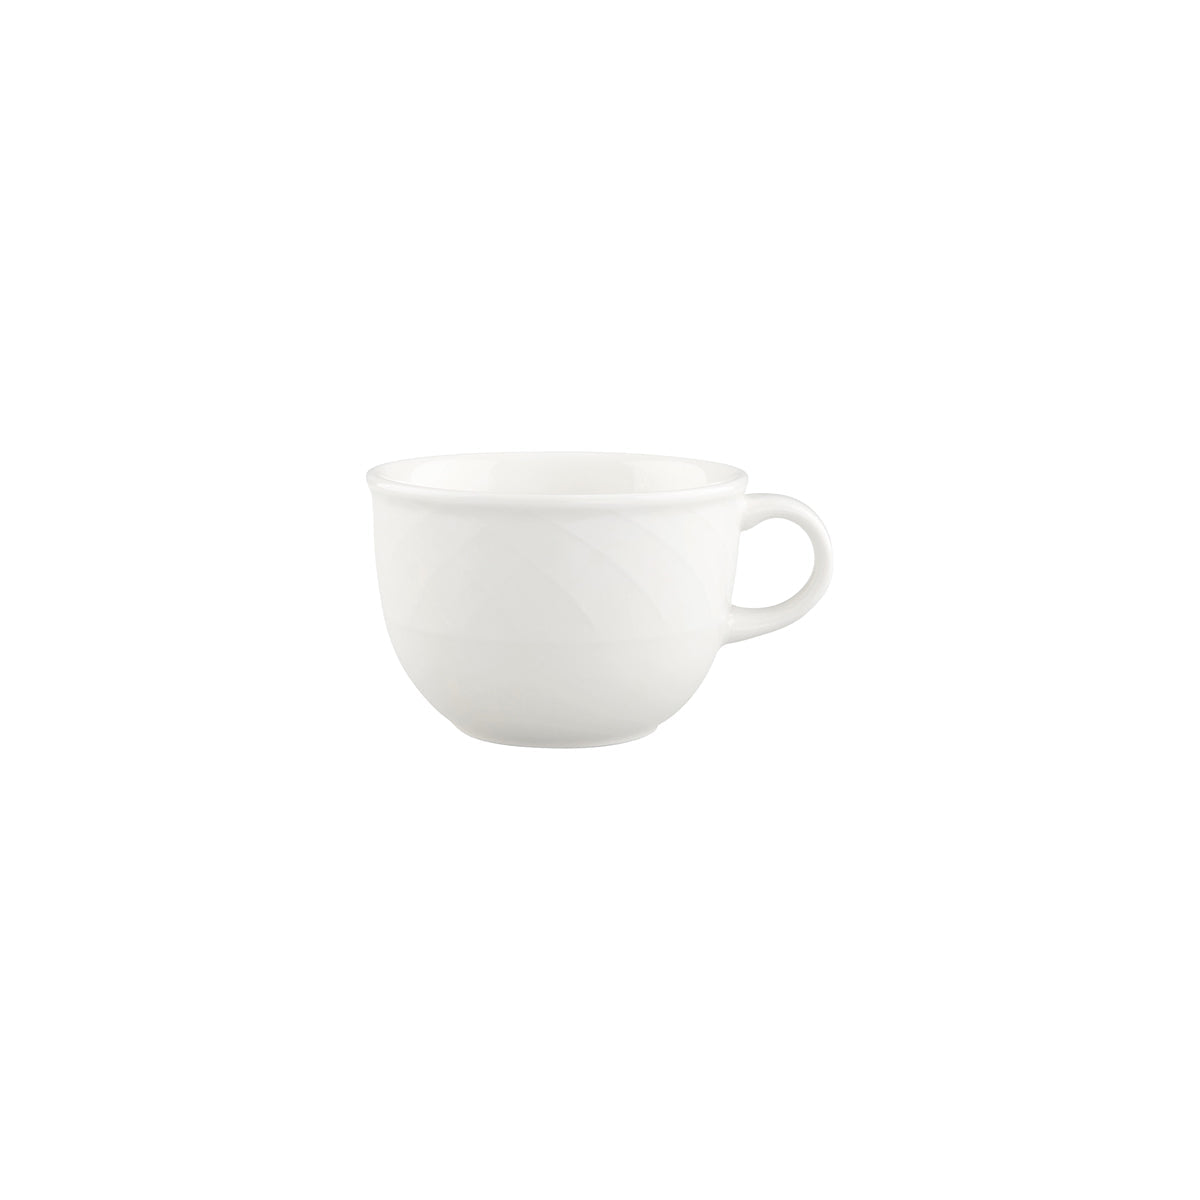 VB16-2238-1270 Villeroy And Boch Villeroy And Boch Bella White Cup No. 2 220ml Tomkin Australia Hospitality Supplies